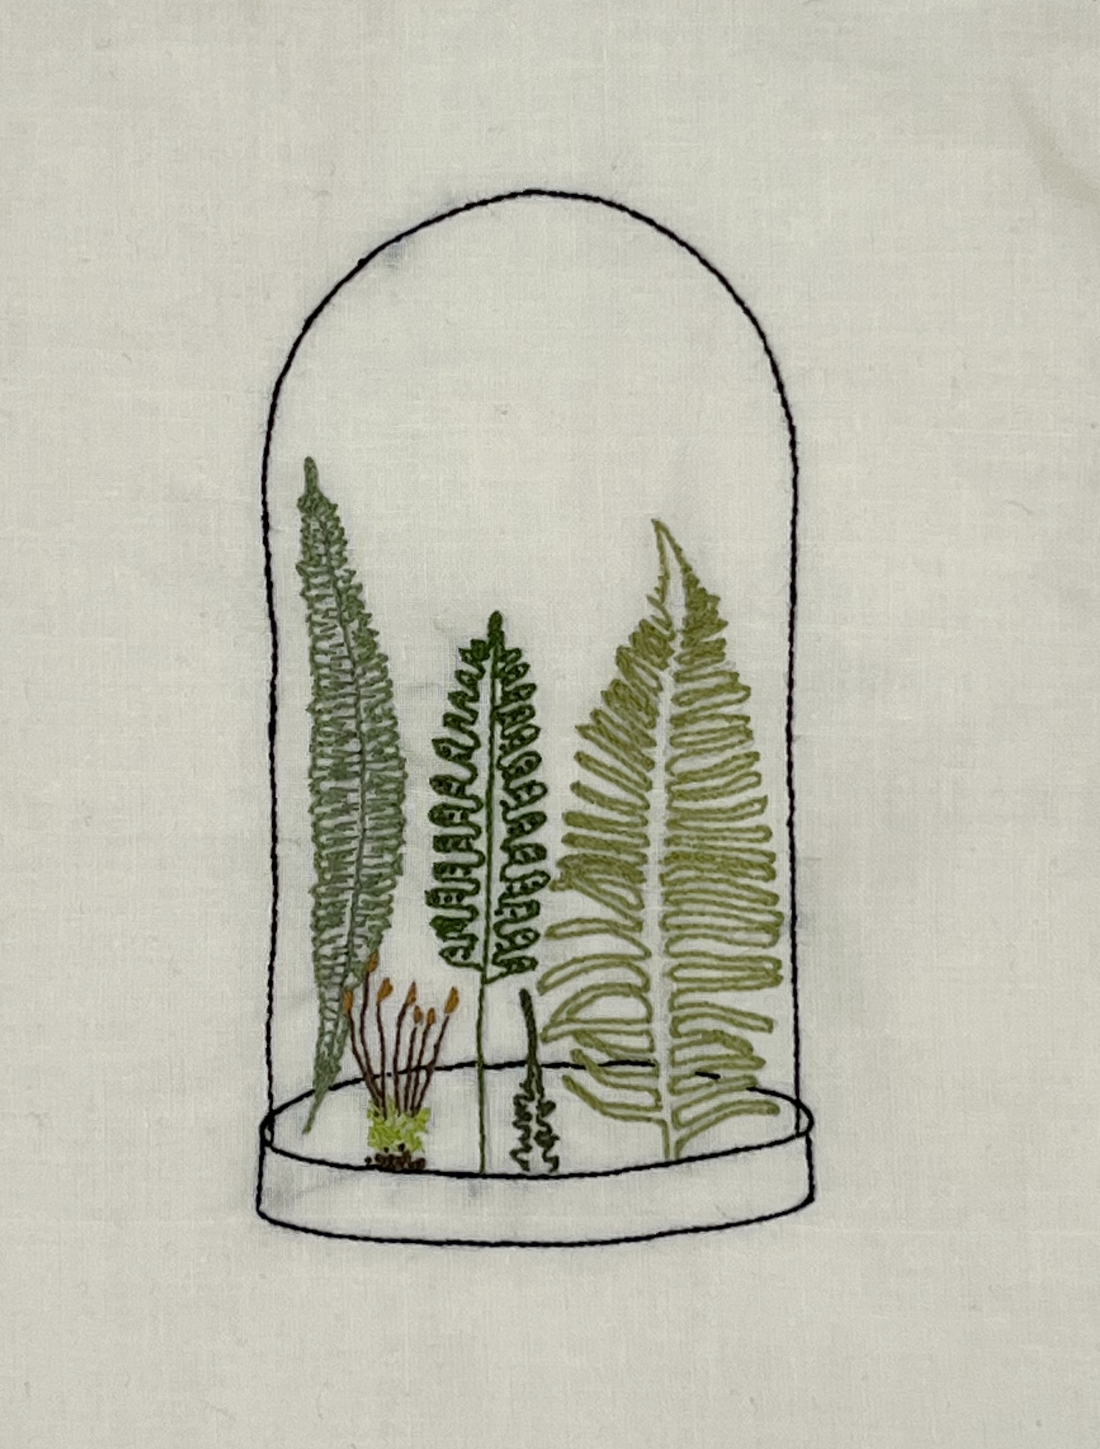 embroidery of ferns under a glass dome